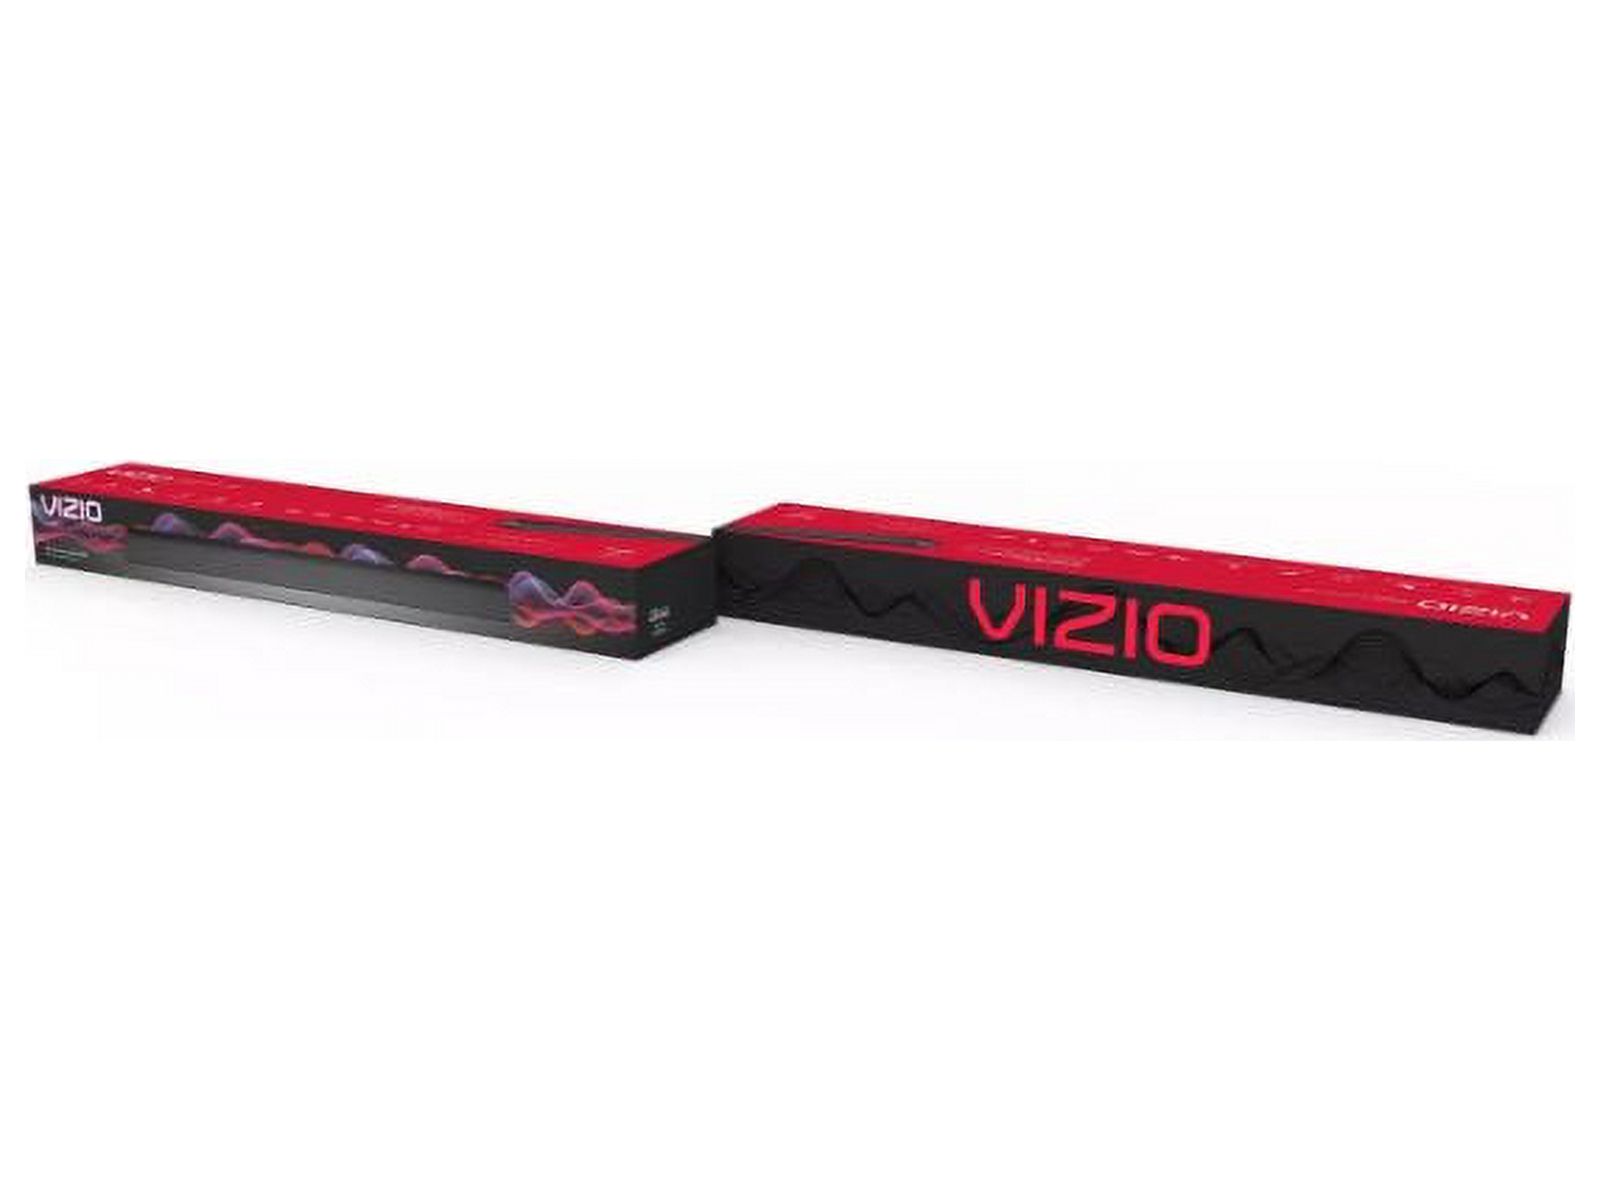 VIZIO M-Series 2.1 Channel All-in-One Sound Bar System - image 2 of 6